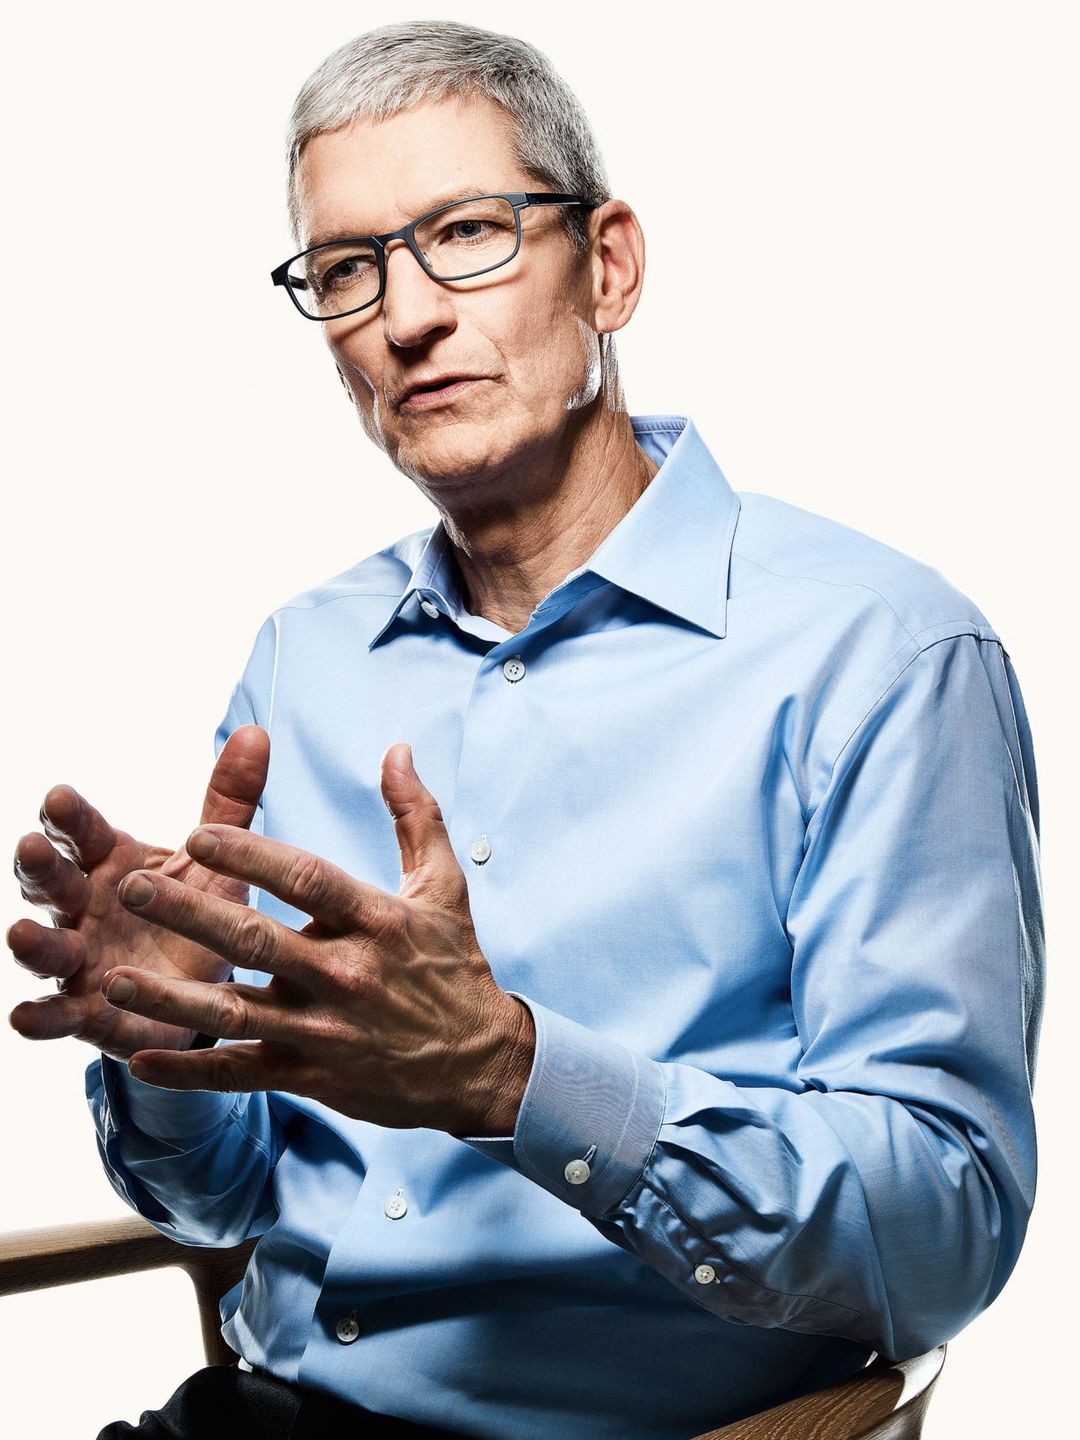 Tim Cook who is his mother